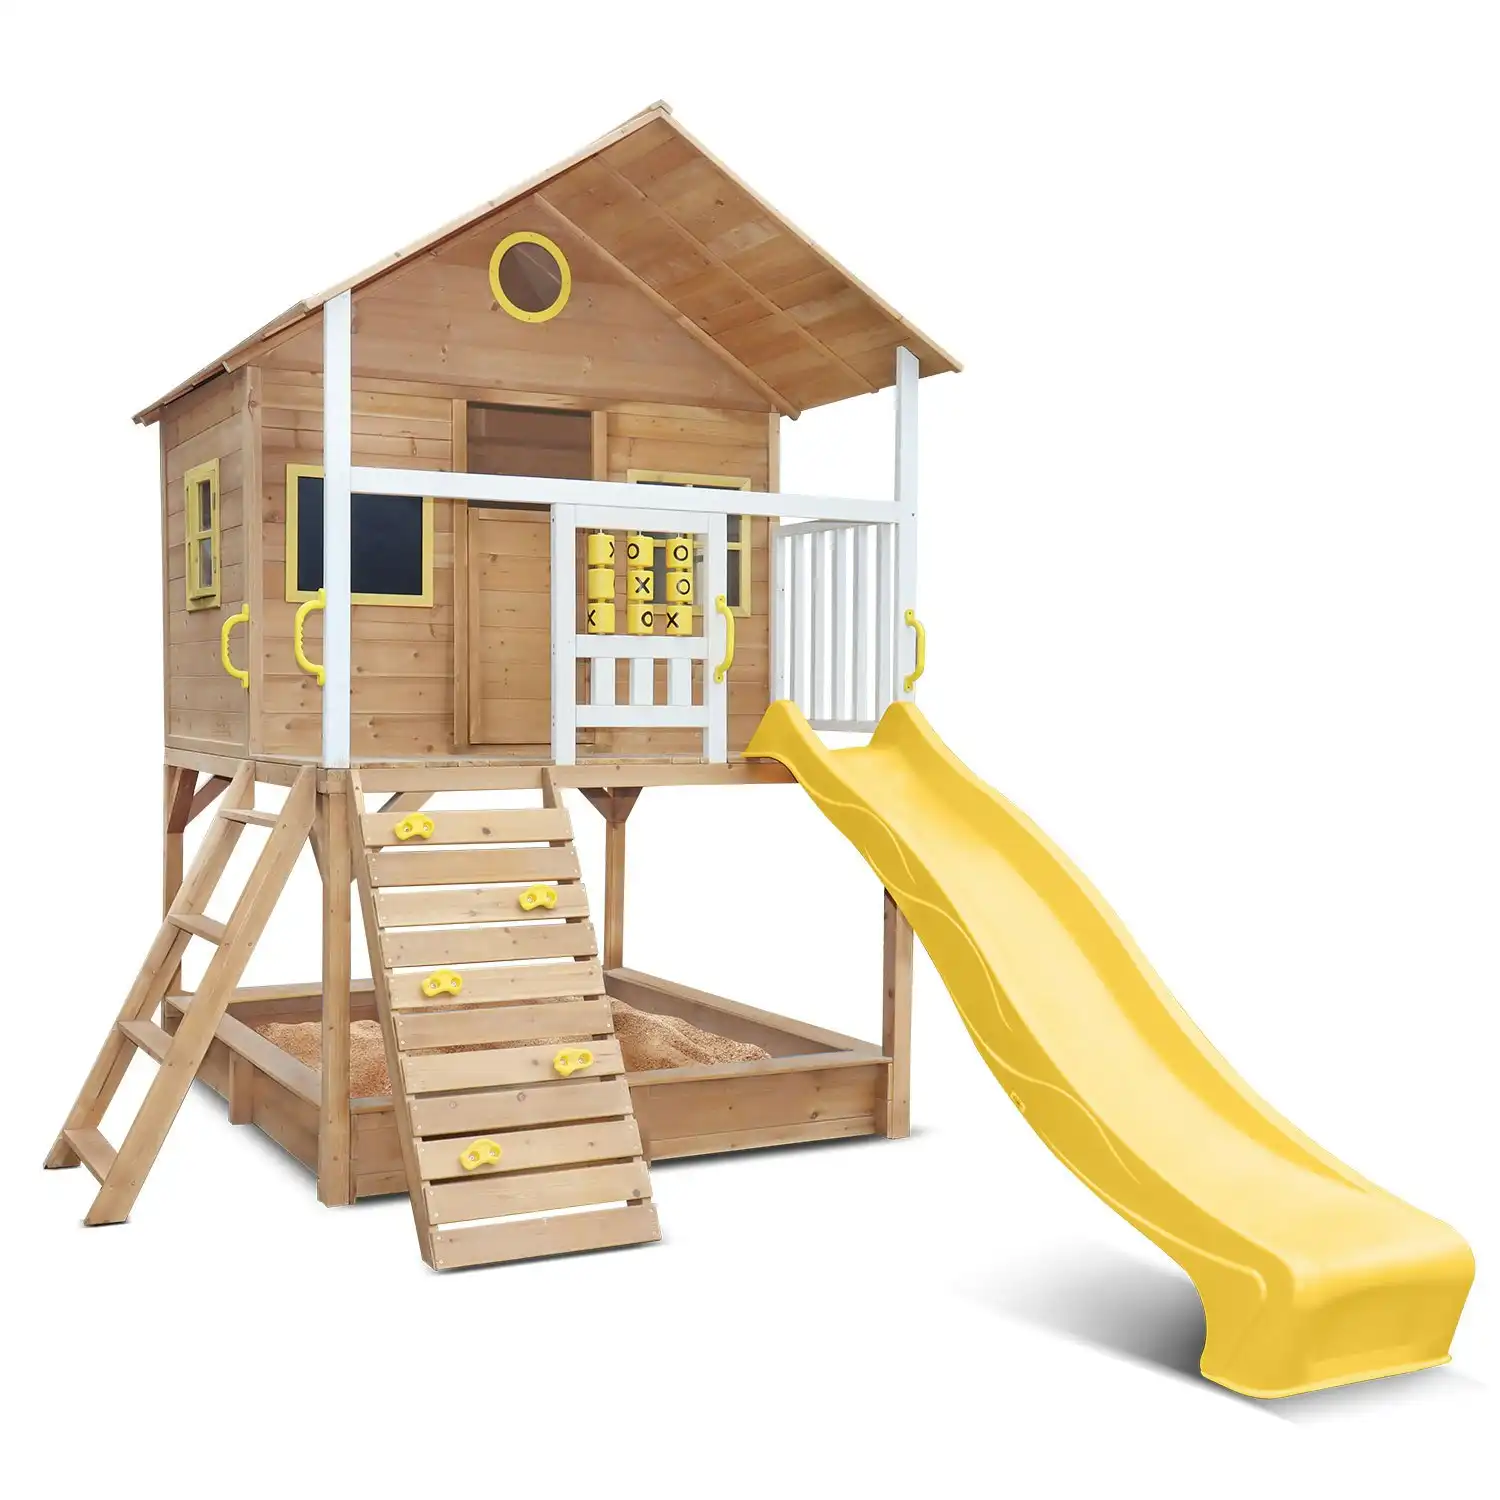 Lifespan Kids Warrigal Cubby House with Yellow Slide